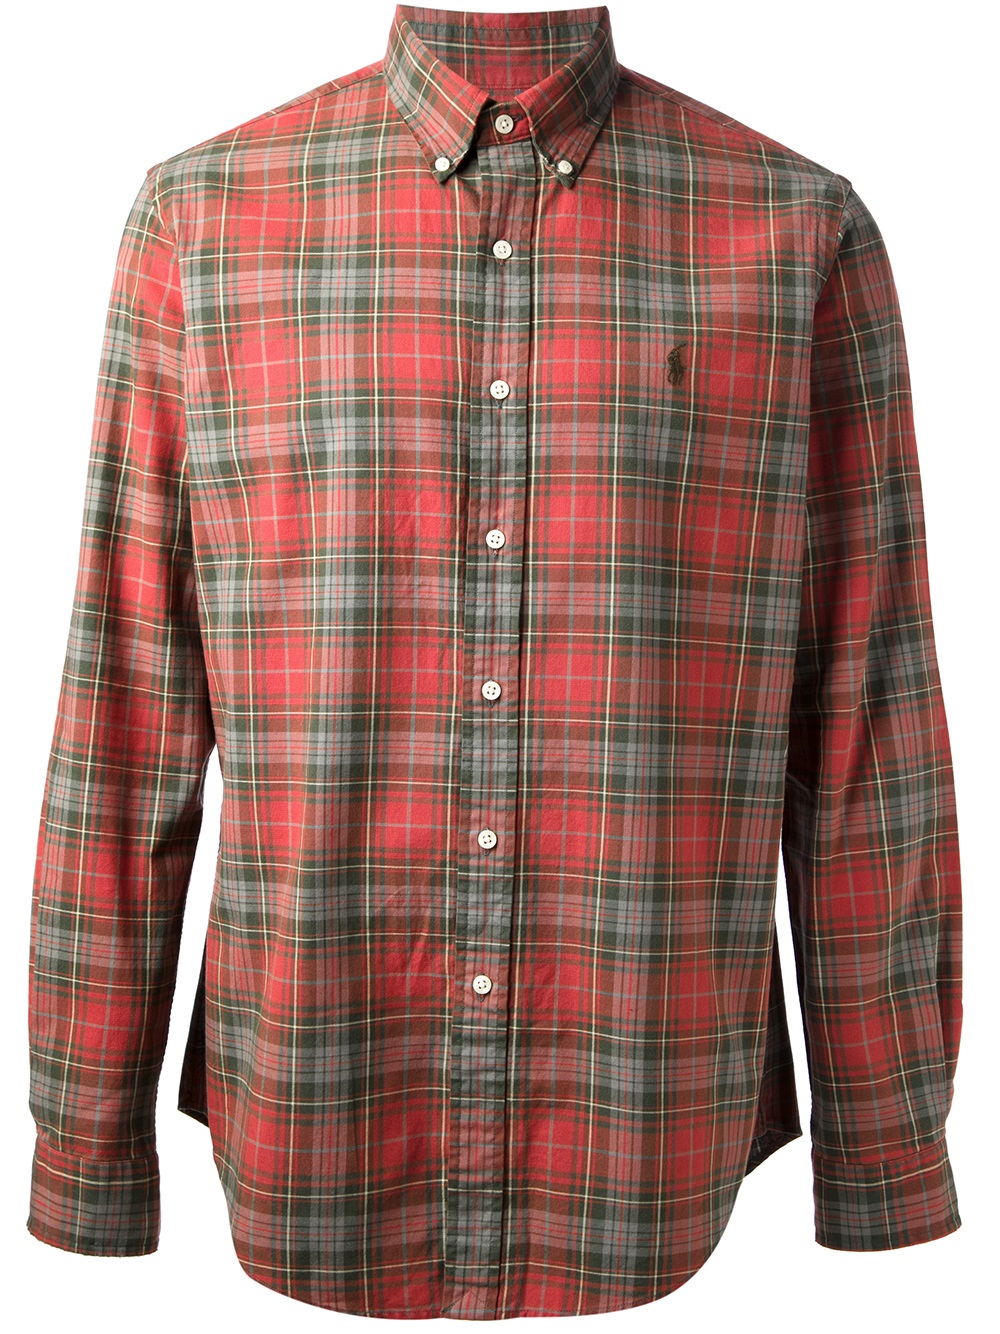 Polo Ralph Lauren Plaid Shirt in Red for Men - Lyst